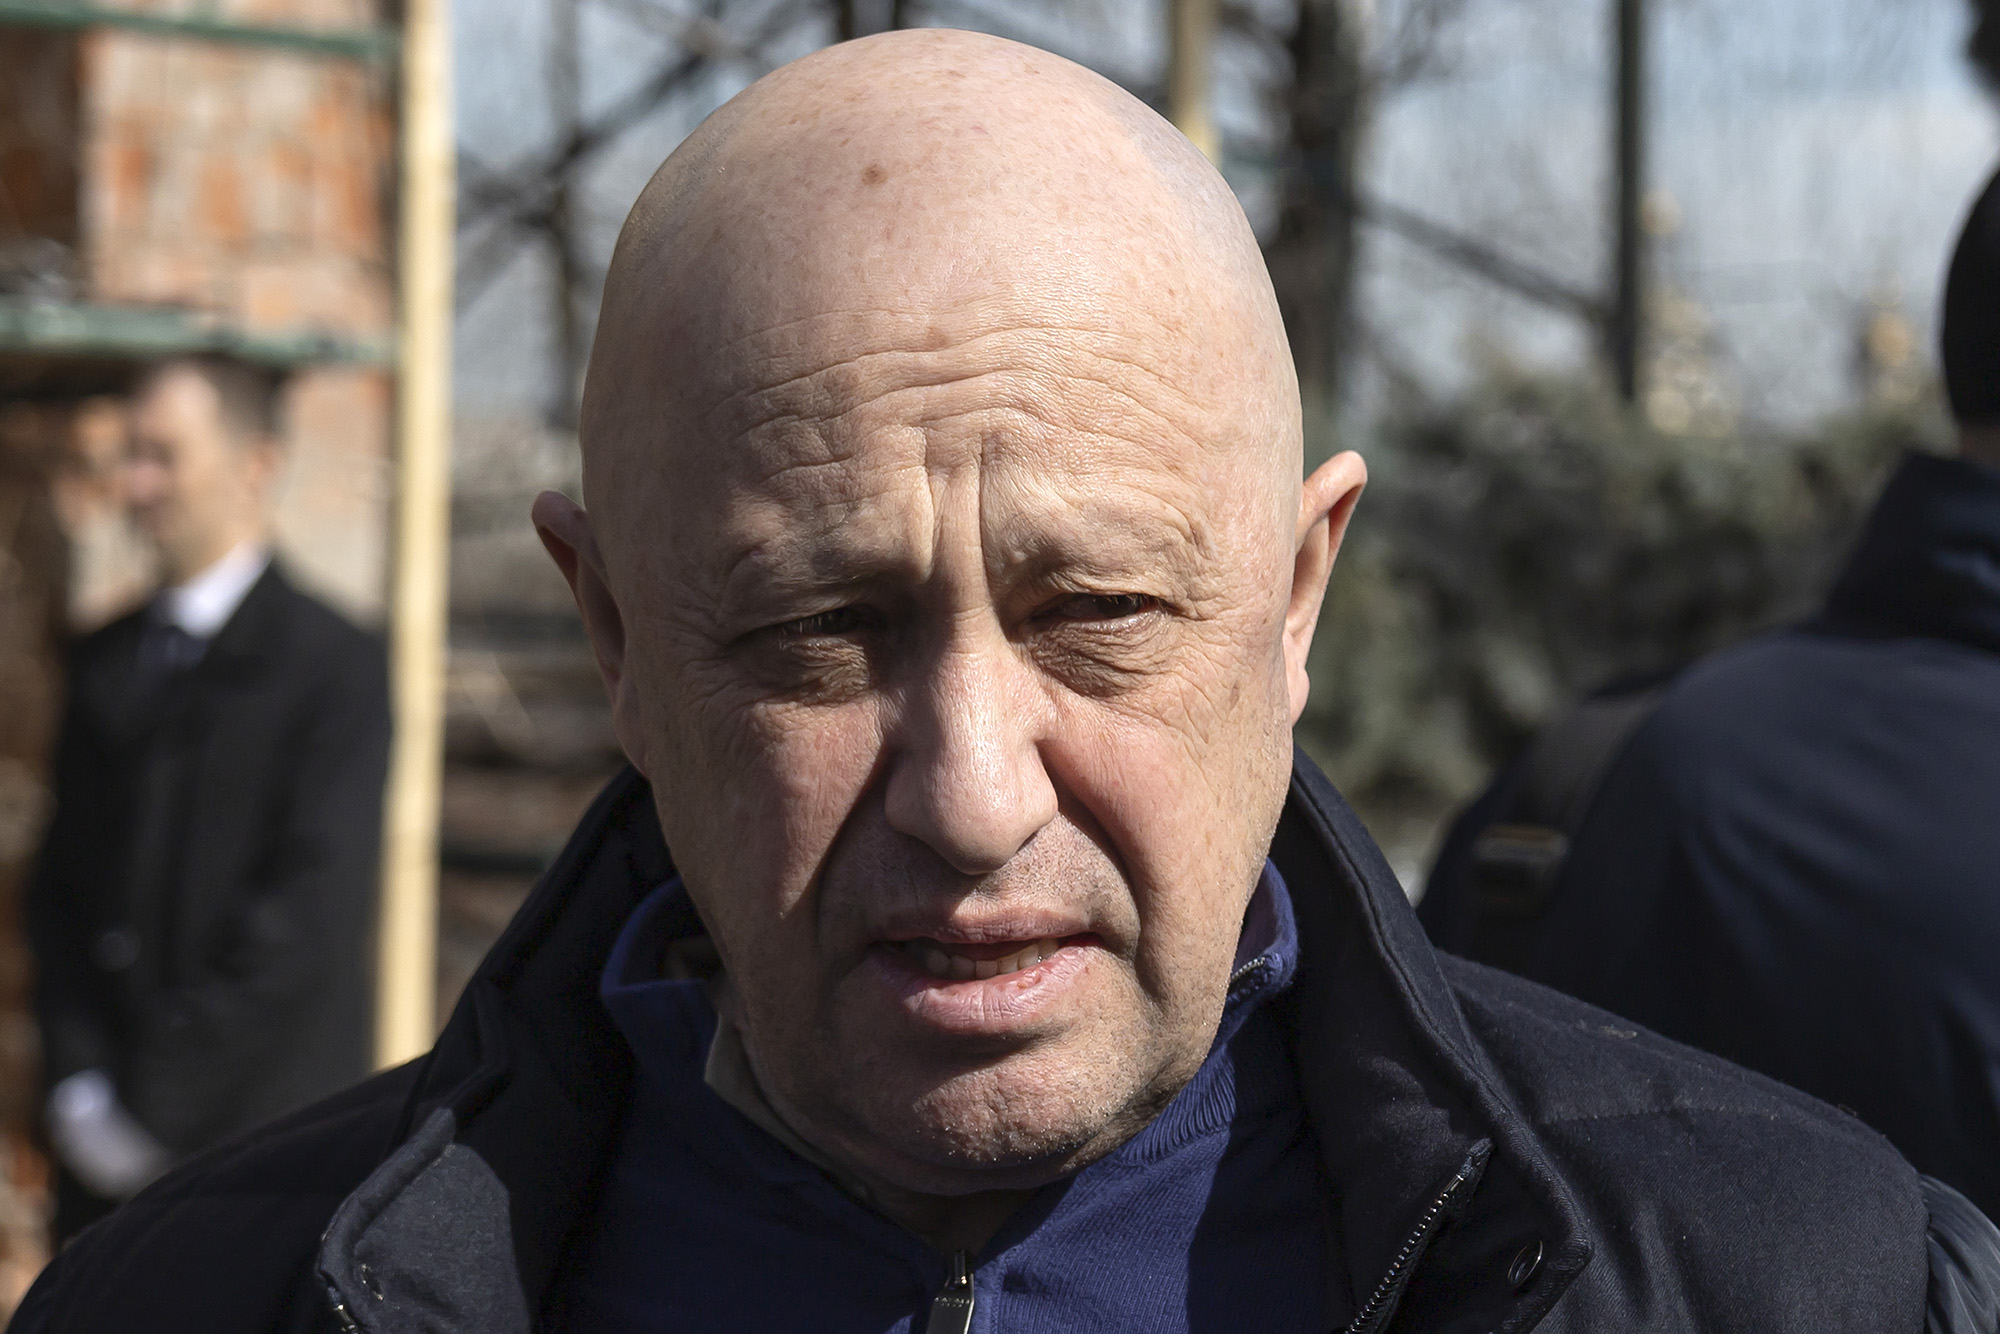 Yevgeny Prigozhin, the owner of the Wagner Group military company, attends a funeral ceremony at the Troyekurovskoye cemetery in Moscow, Russia, on April 8.